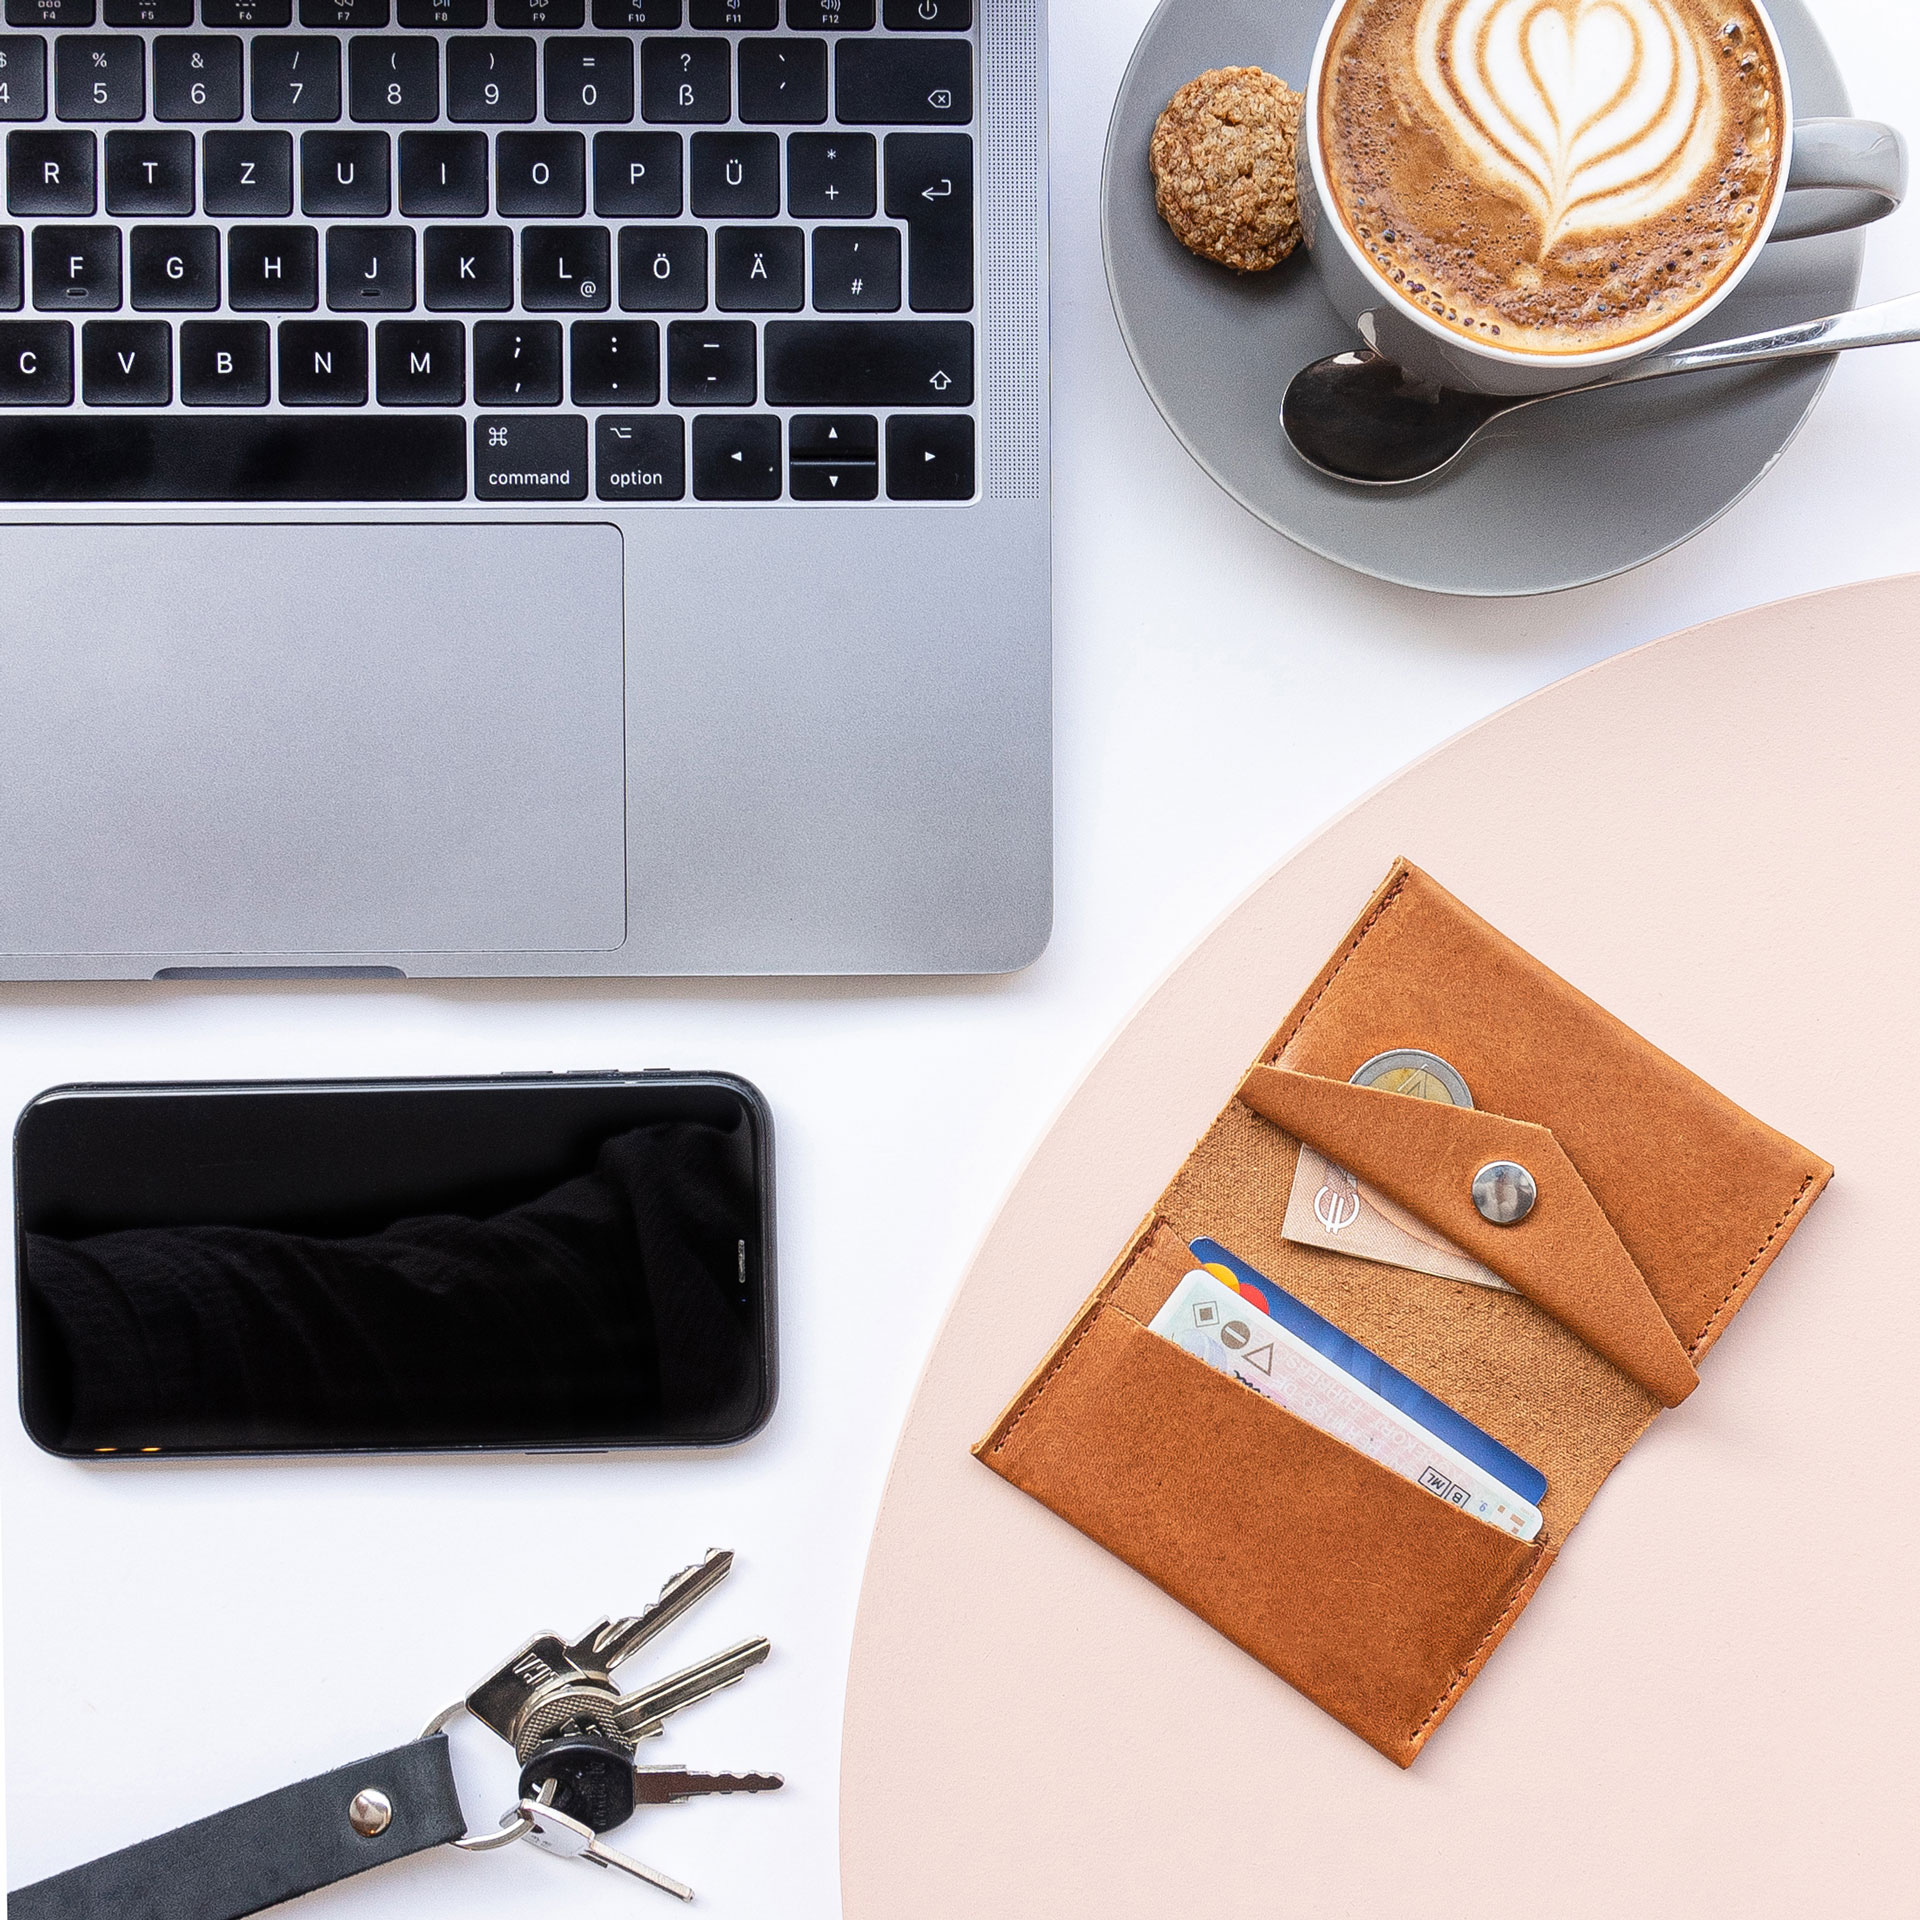 Wallet OLI MIDI in cognac oiled in size comparison with laptop, coffee cup, cell phone and keys.